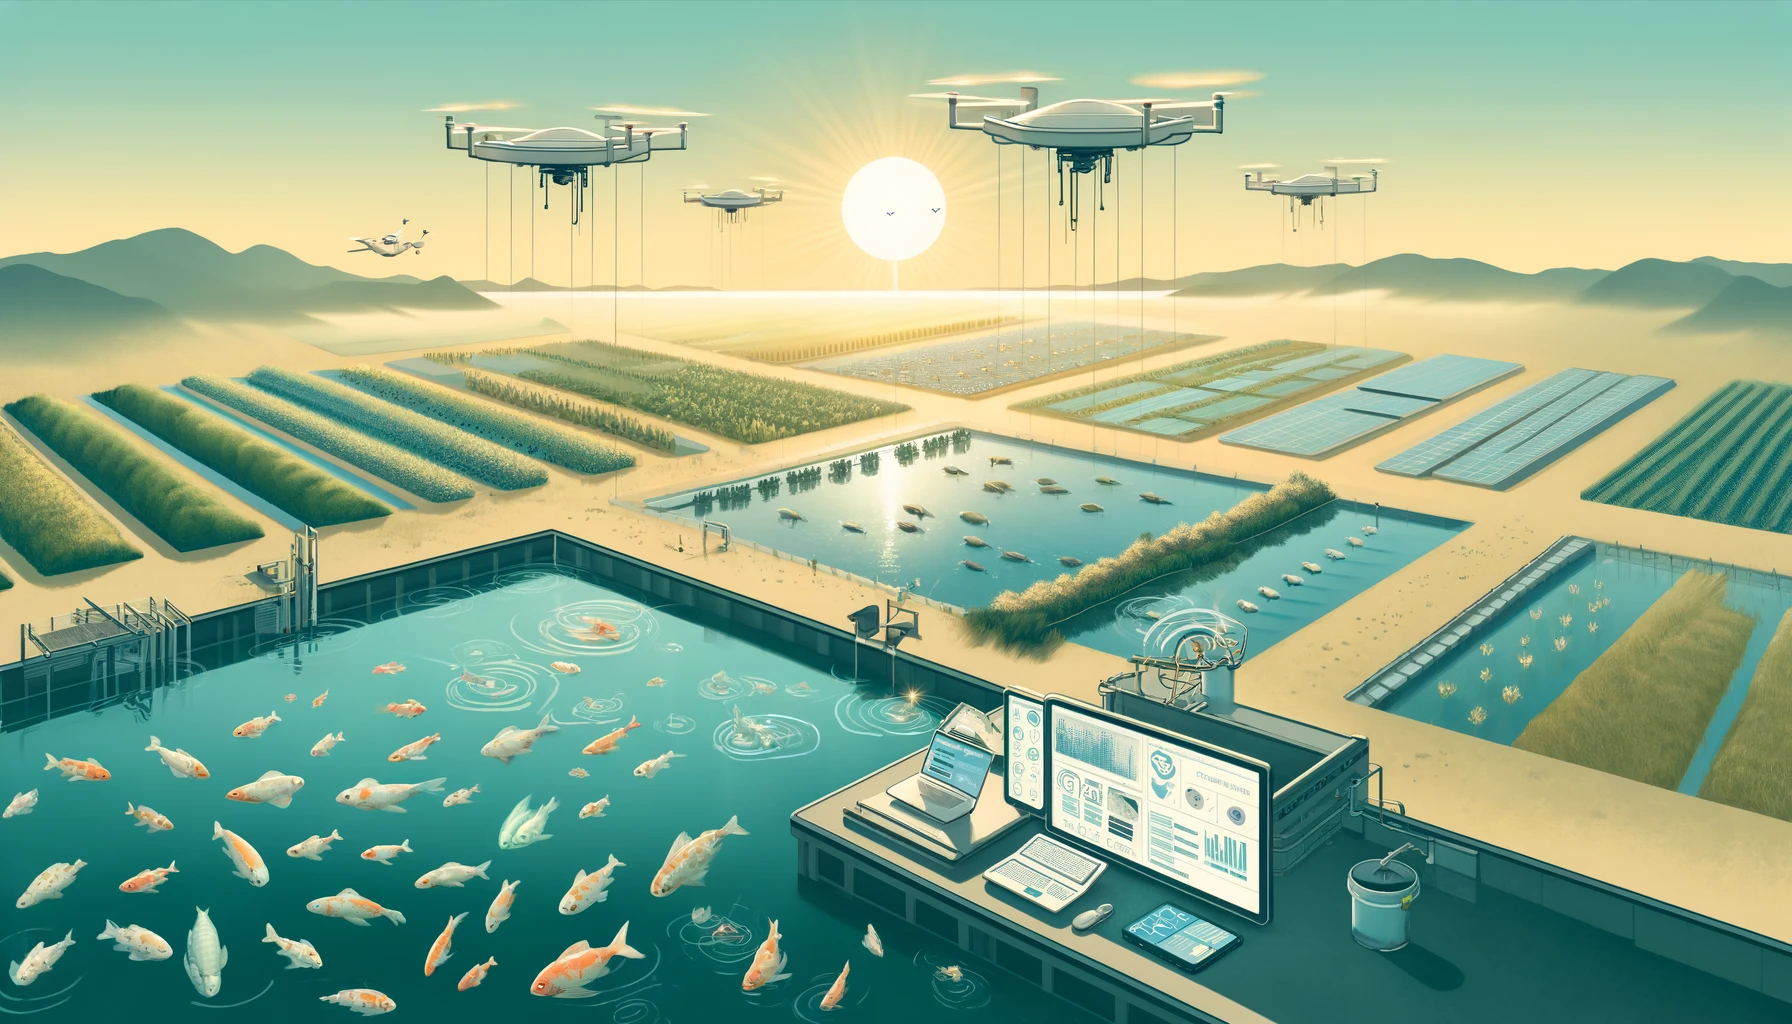 eco-friendly fish farming enhanced by technology, with a simple and clear style, perfect for highlighting the new dawn in sustainable aquaculture.